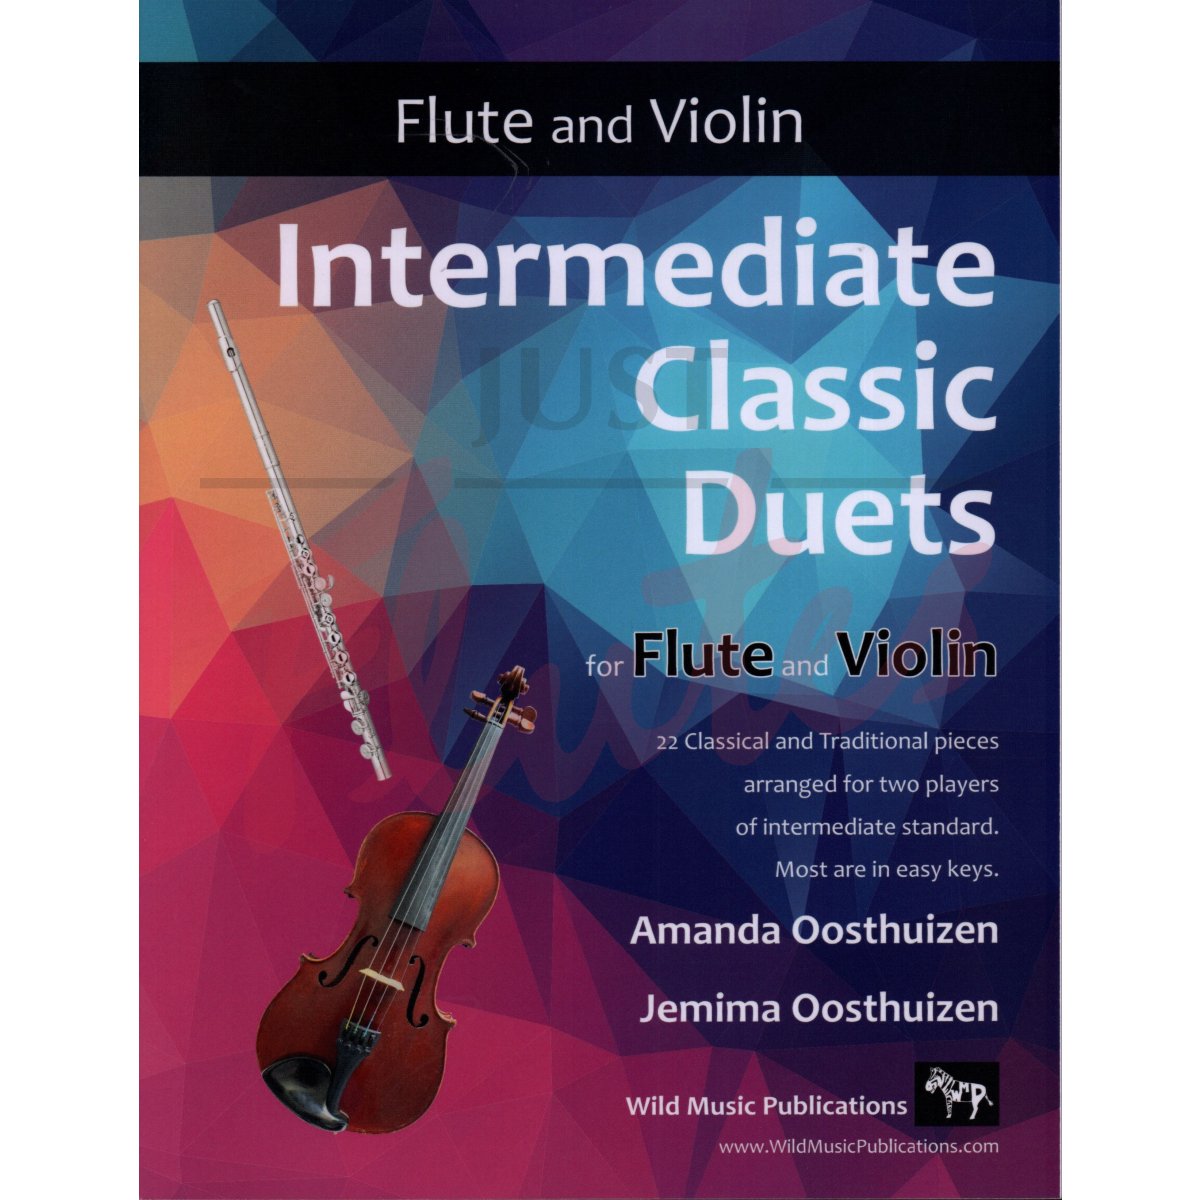 Intermediate Classic Duets for Flute and Violin